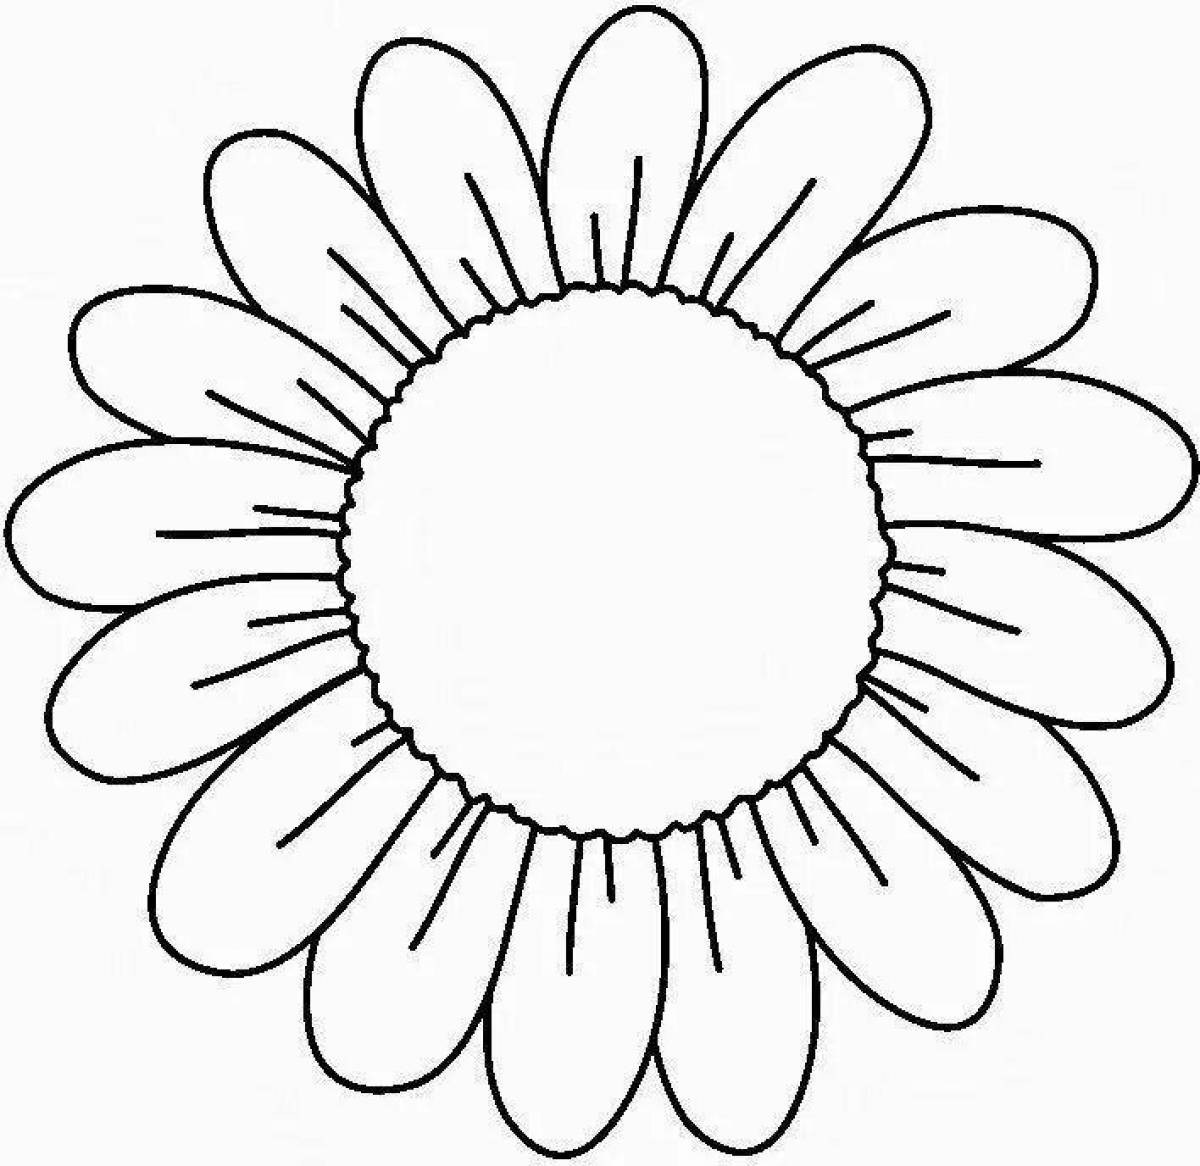 Chamomile flower coloring page live